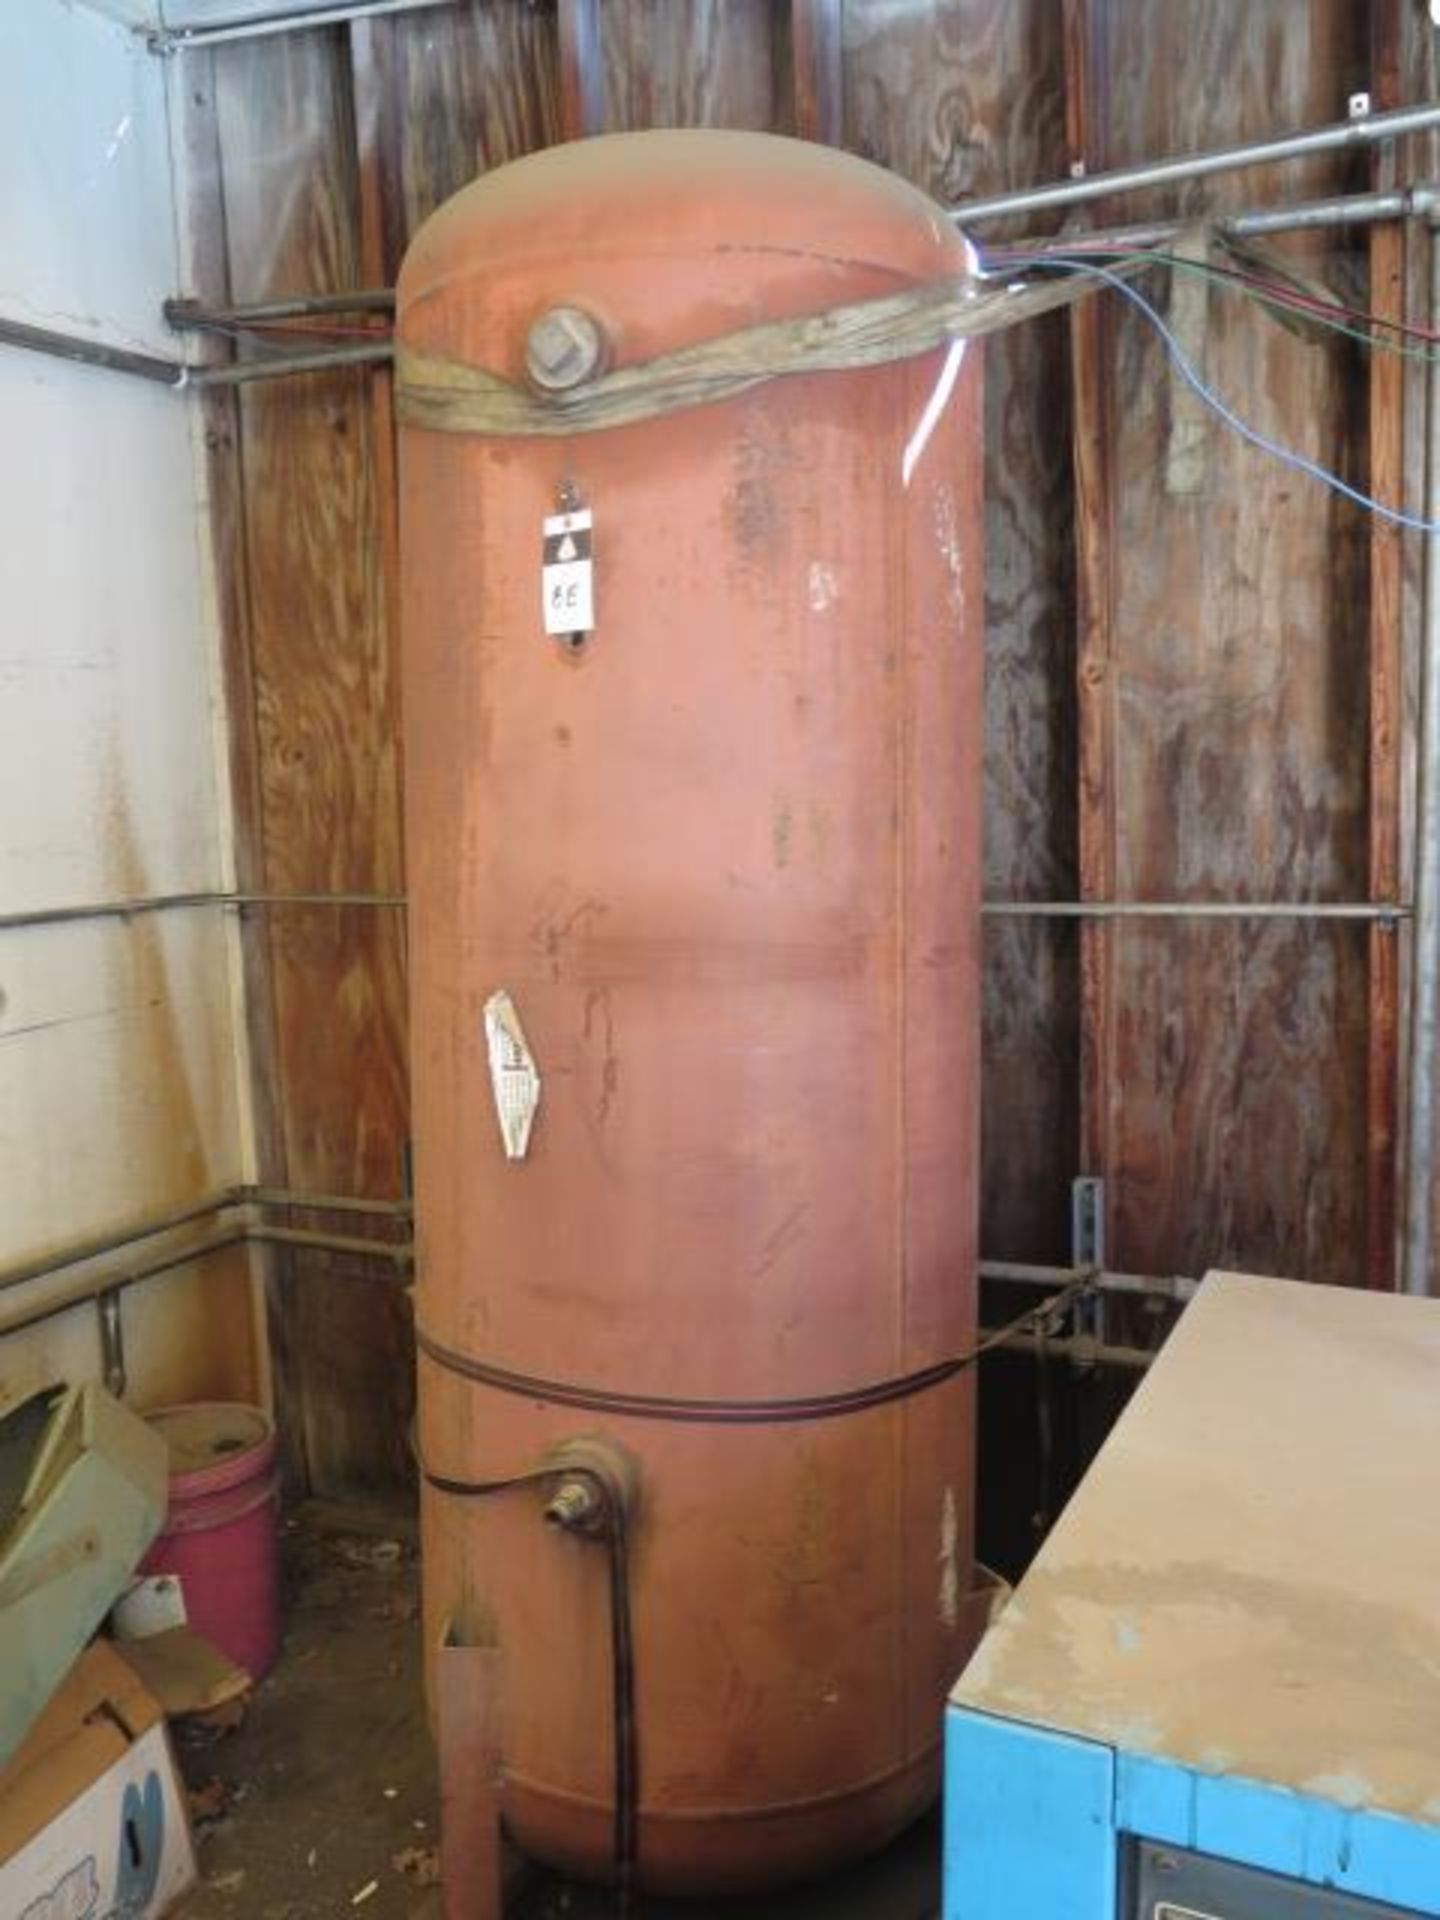 240 Gallon Vertical Air Storage Tank (SOLD AS-IS - NO WARRANTY)